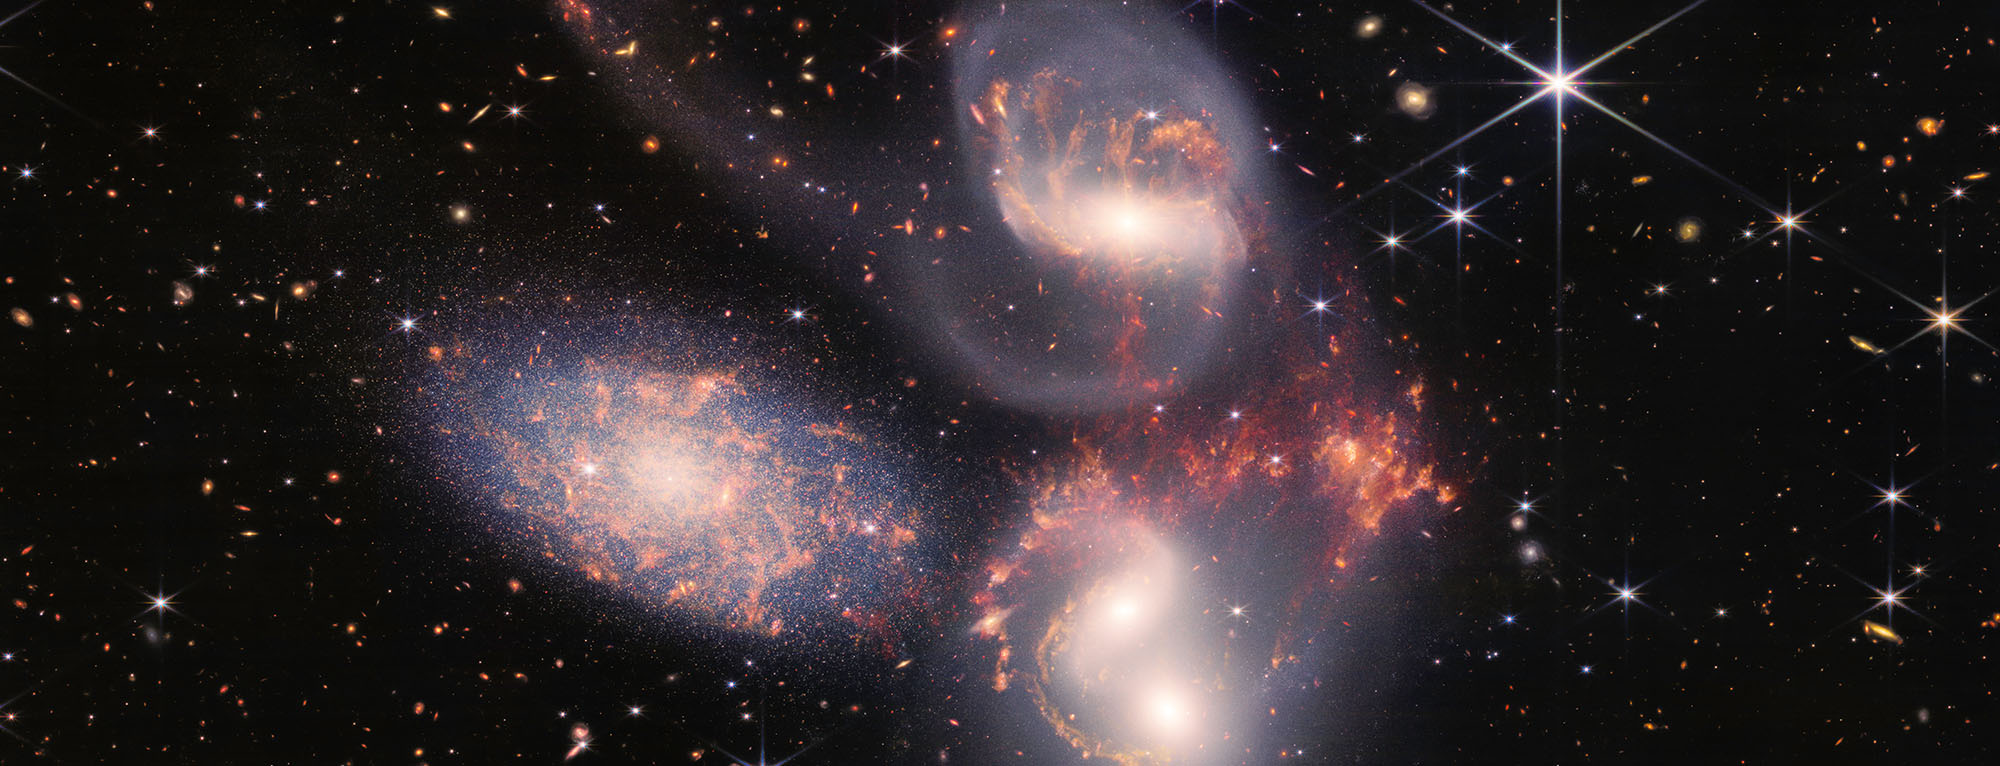 Five galaxies in space